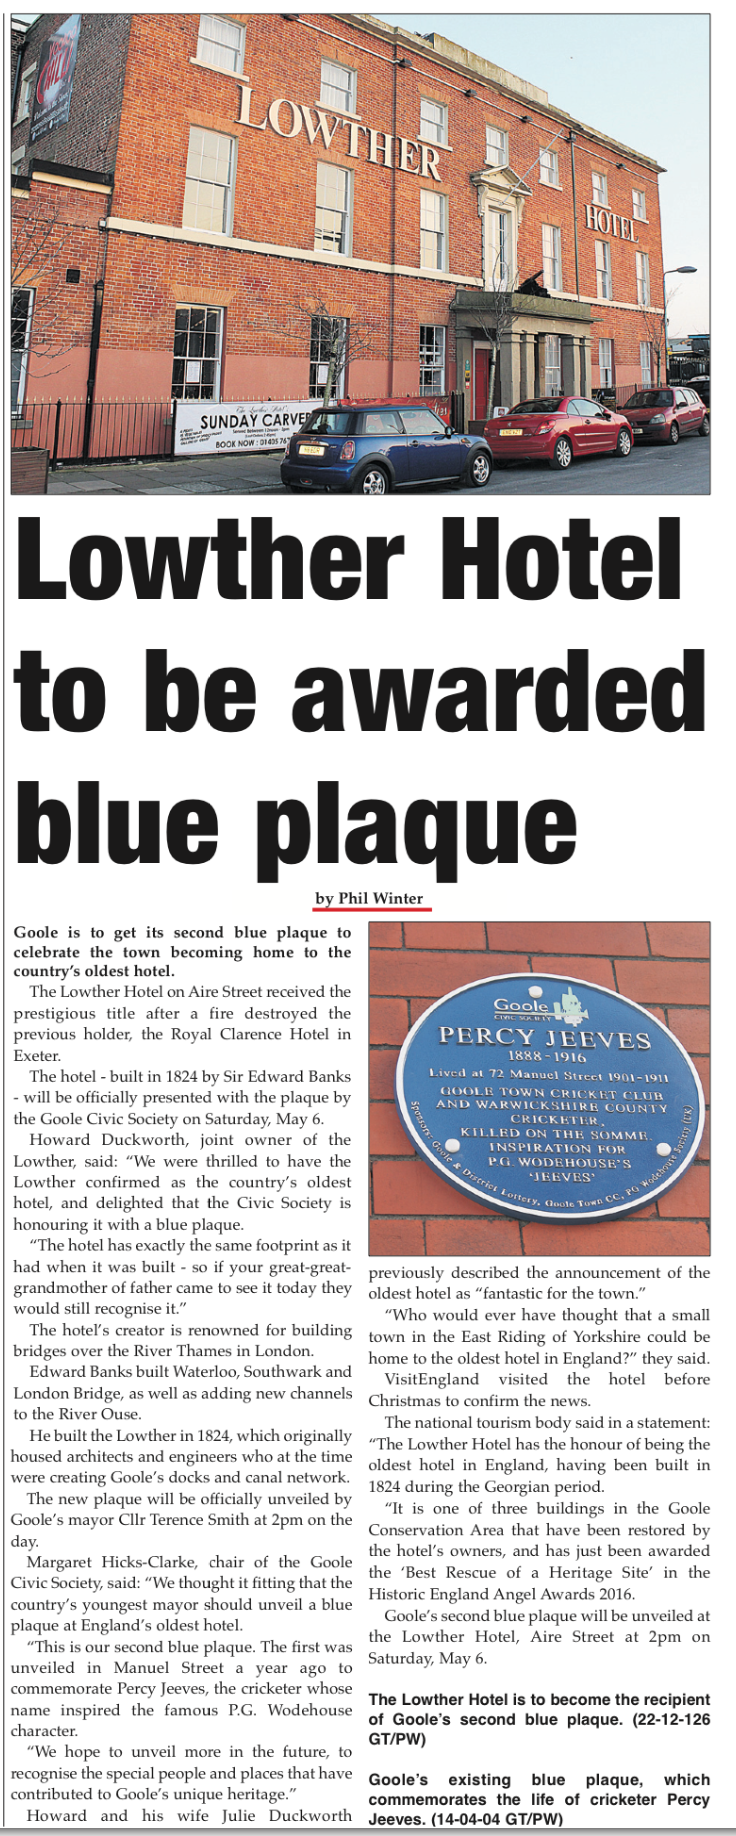 Lowther Hotel,Goole, East Riding of Yorkshire, to get Civic Society Blue Plaque as England's oldest hotel